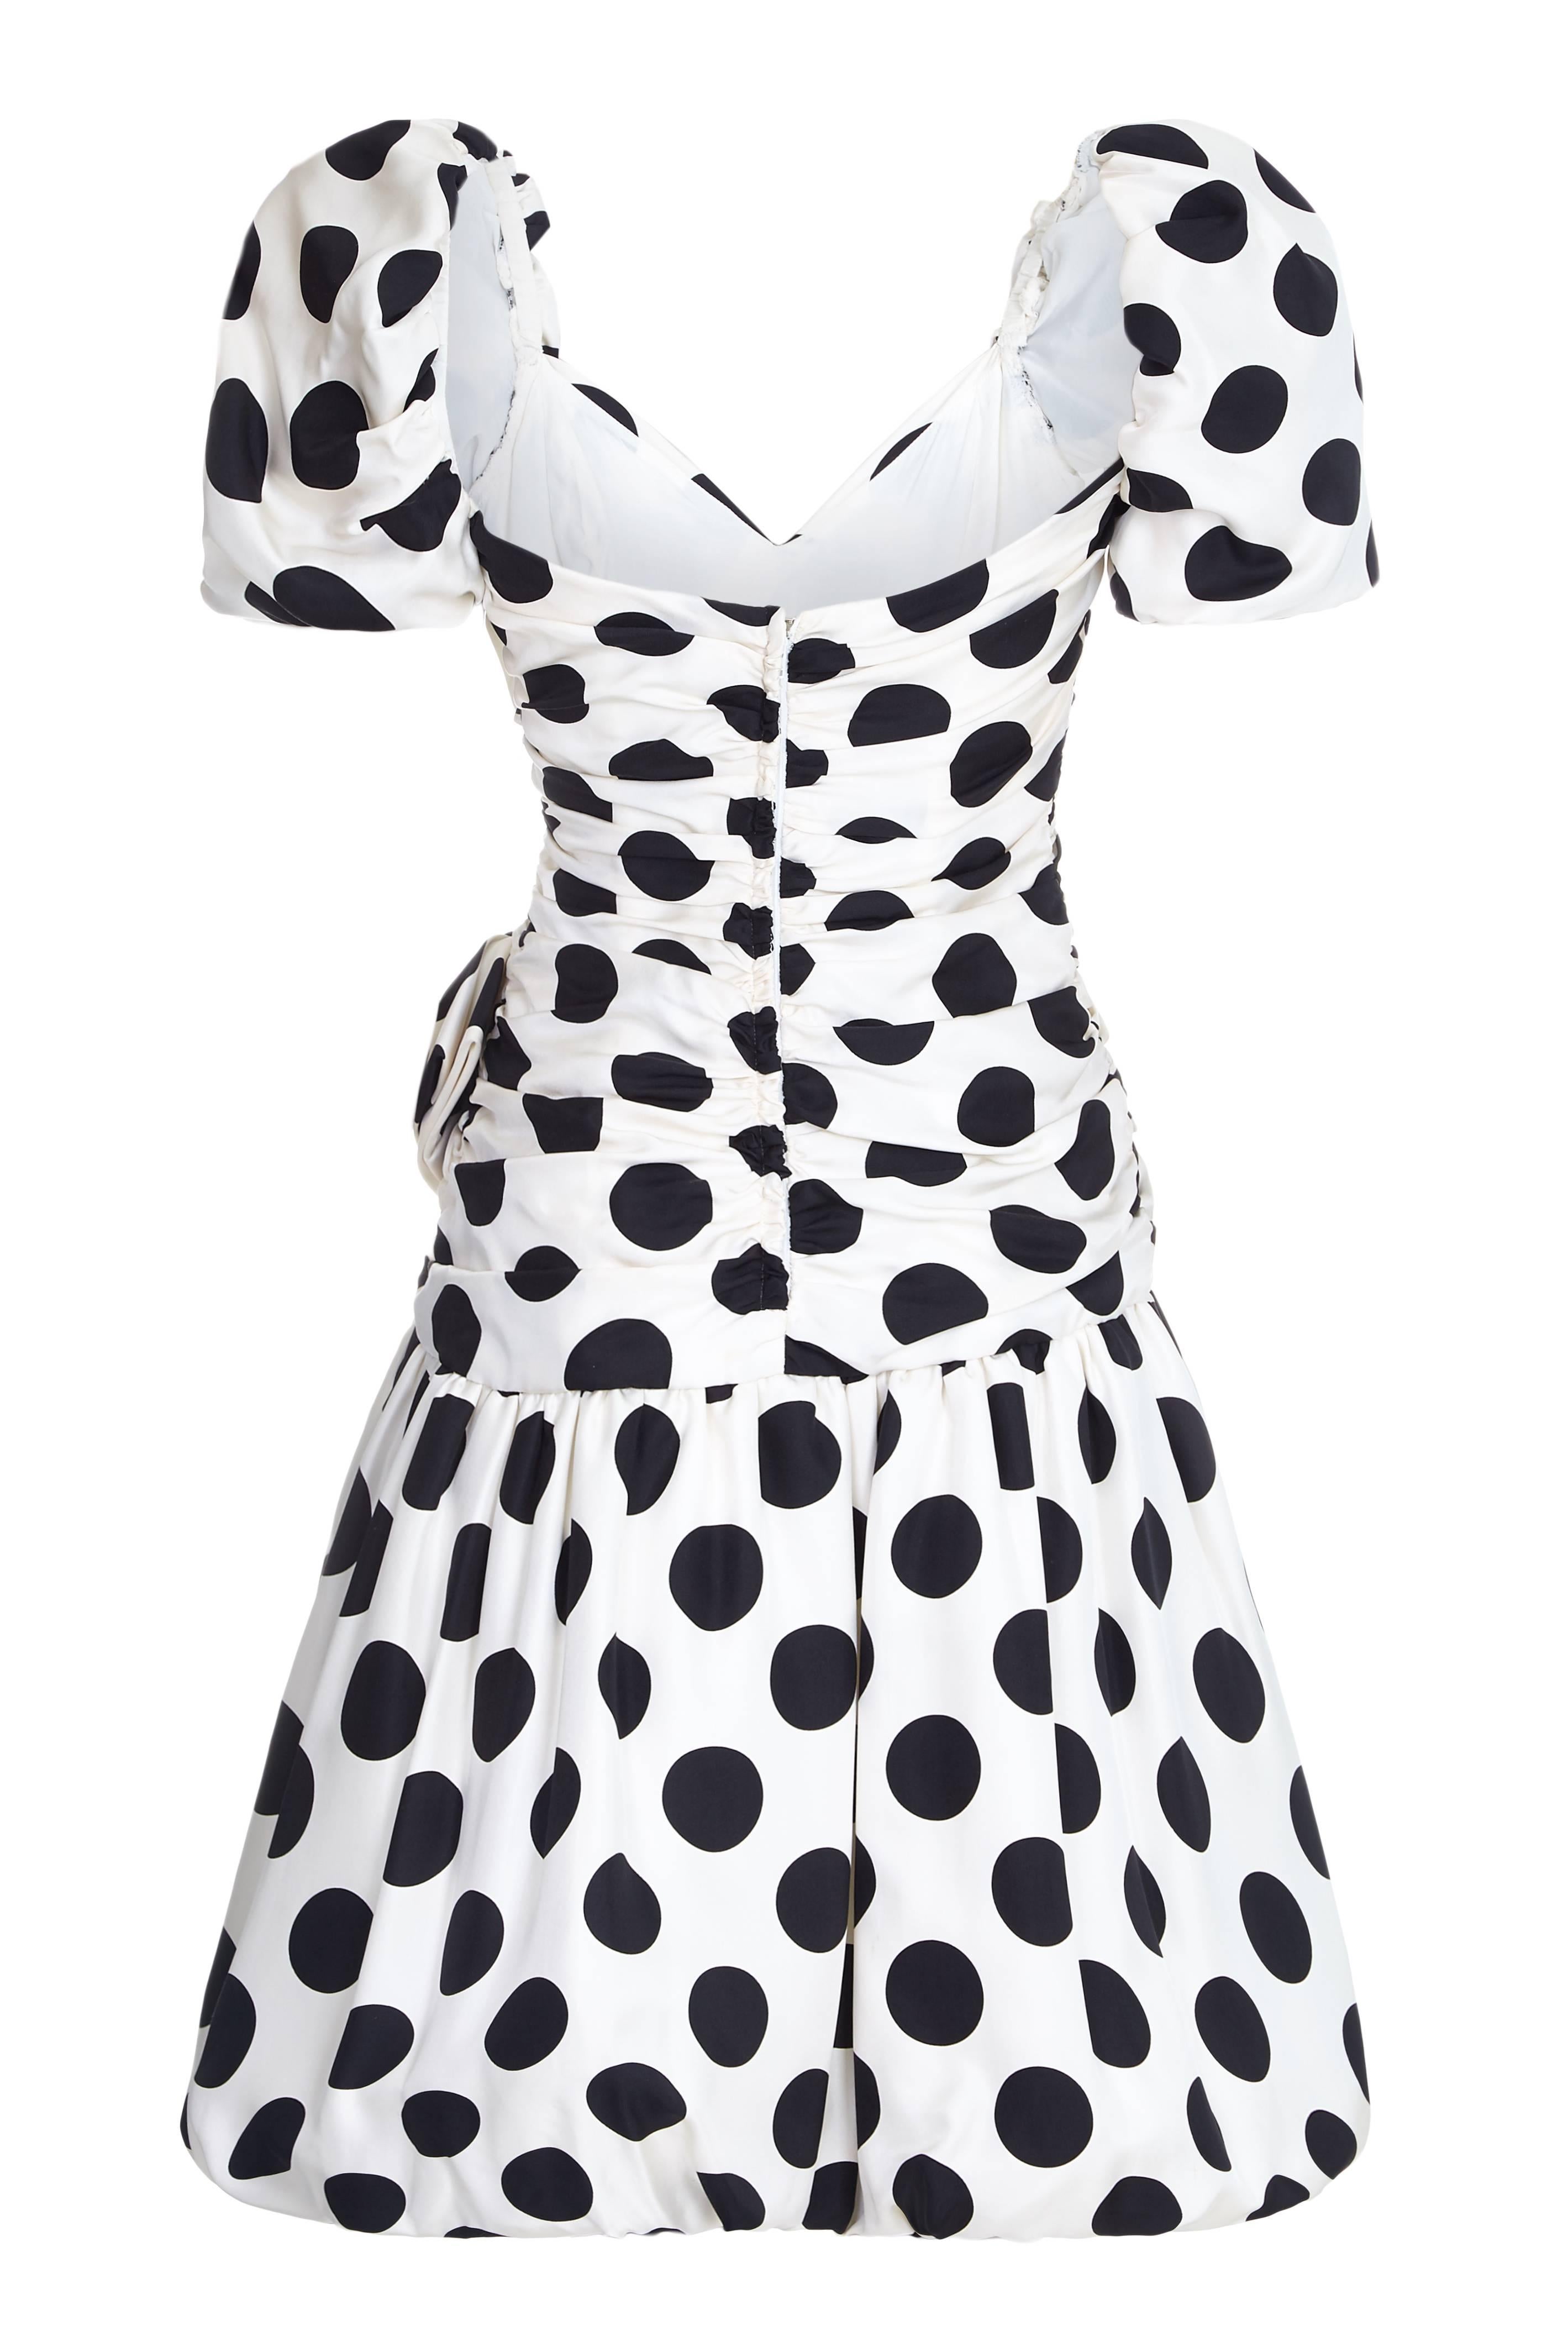 Very cute vintage 1980s dress by Lillie Rubin in black and white silk with polka dot print.  The dress features an asymmetrically ruched bodice with large bow on the left hip and a puffball skirt. Inside it is fully lined and there is some light